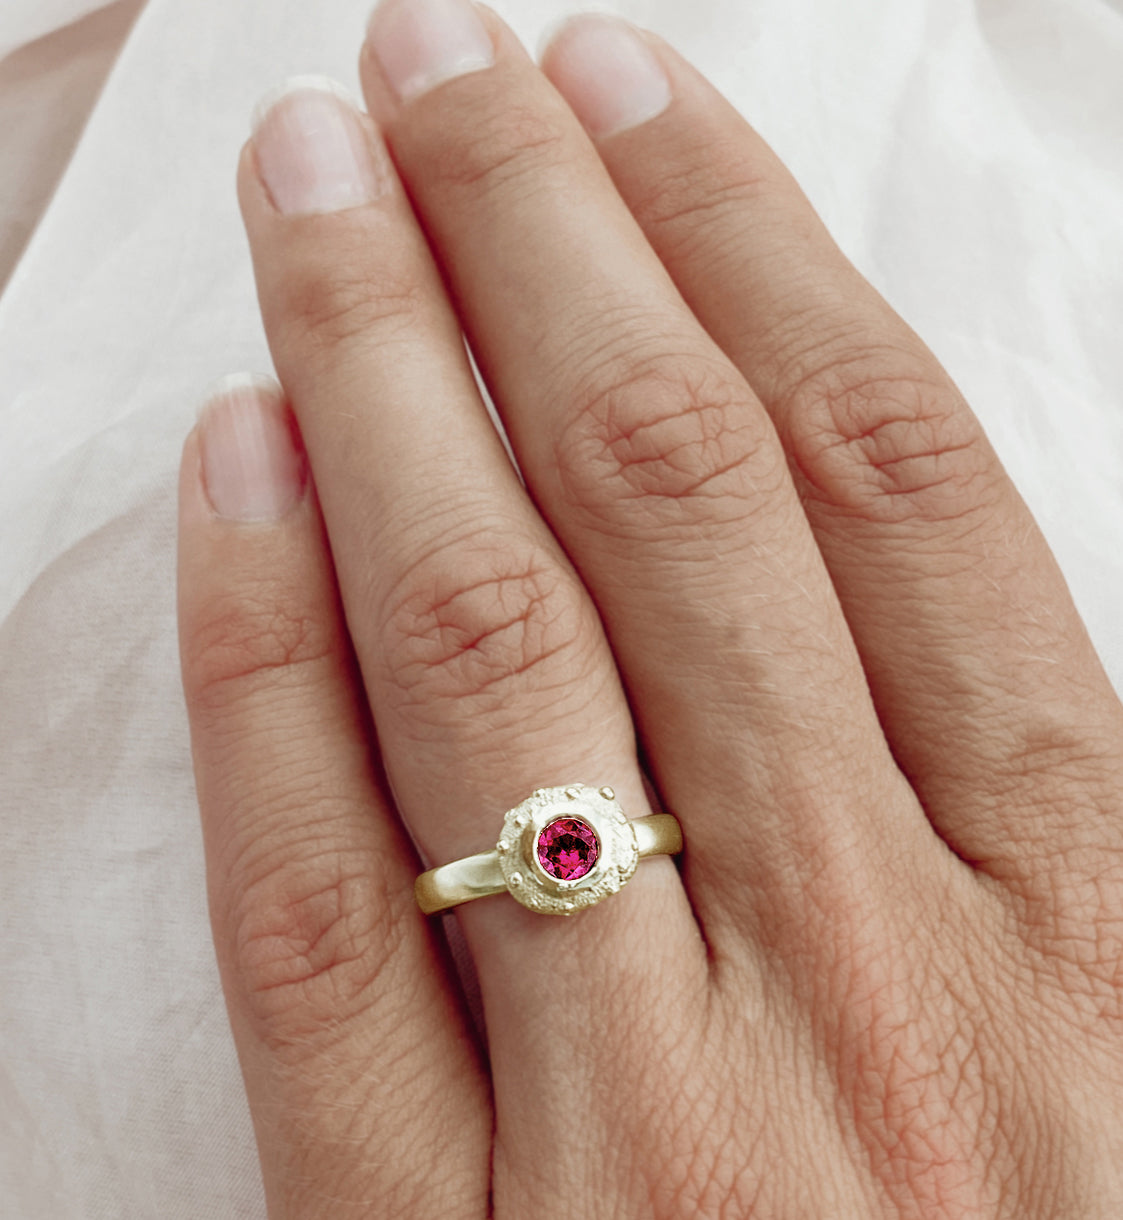 Ring with Ruby